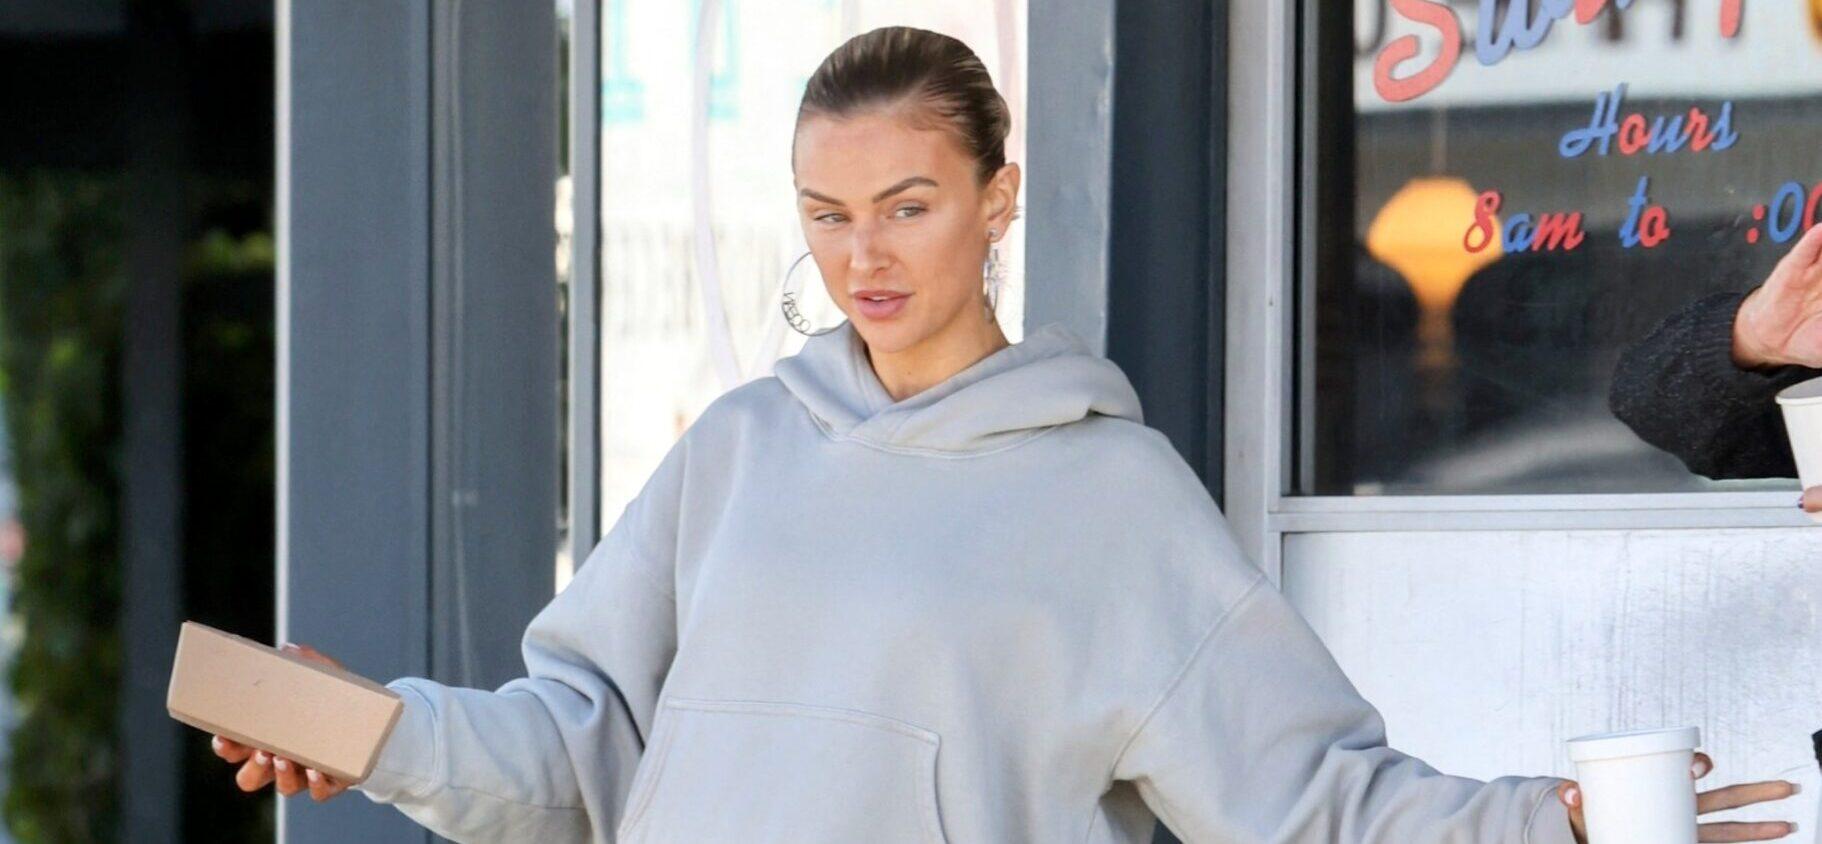 Lala Kent Slams Tom Sandoval For ‘Checking In On His Main Chick’